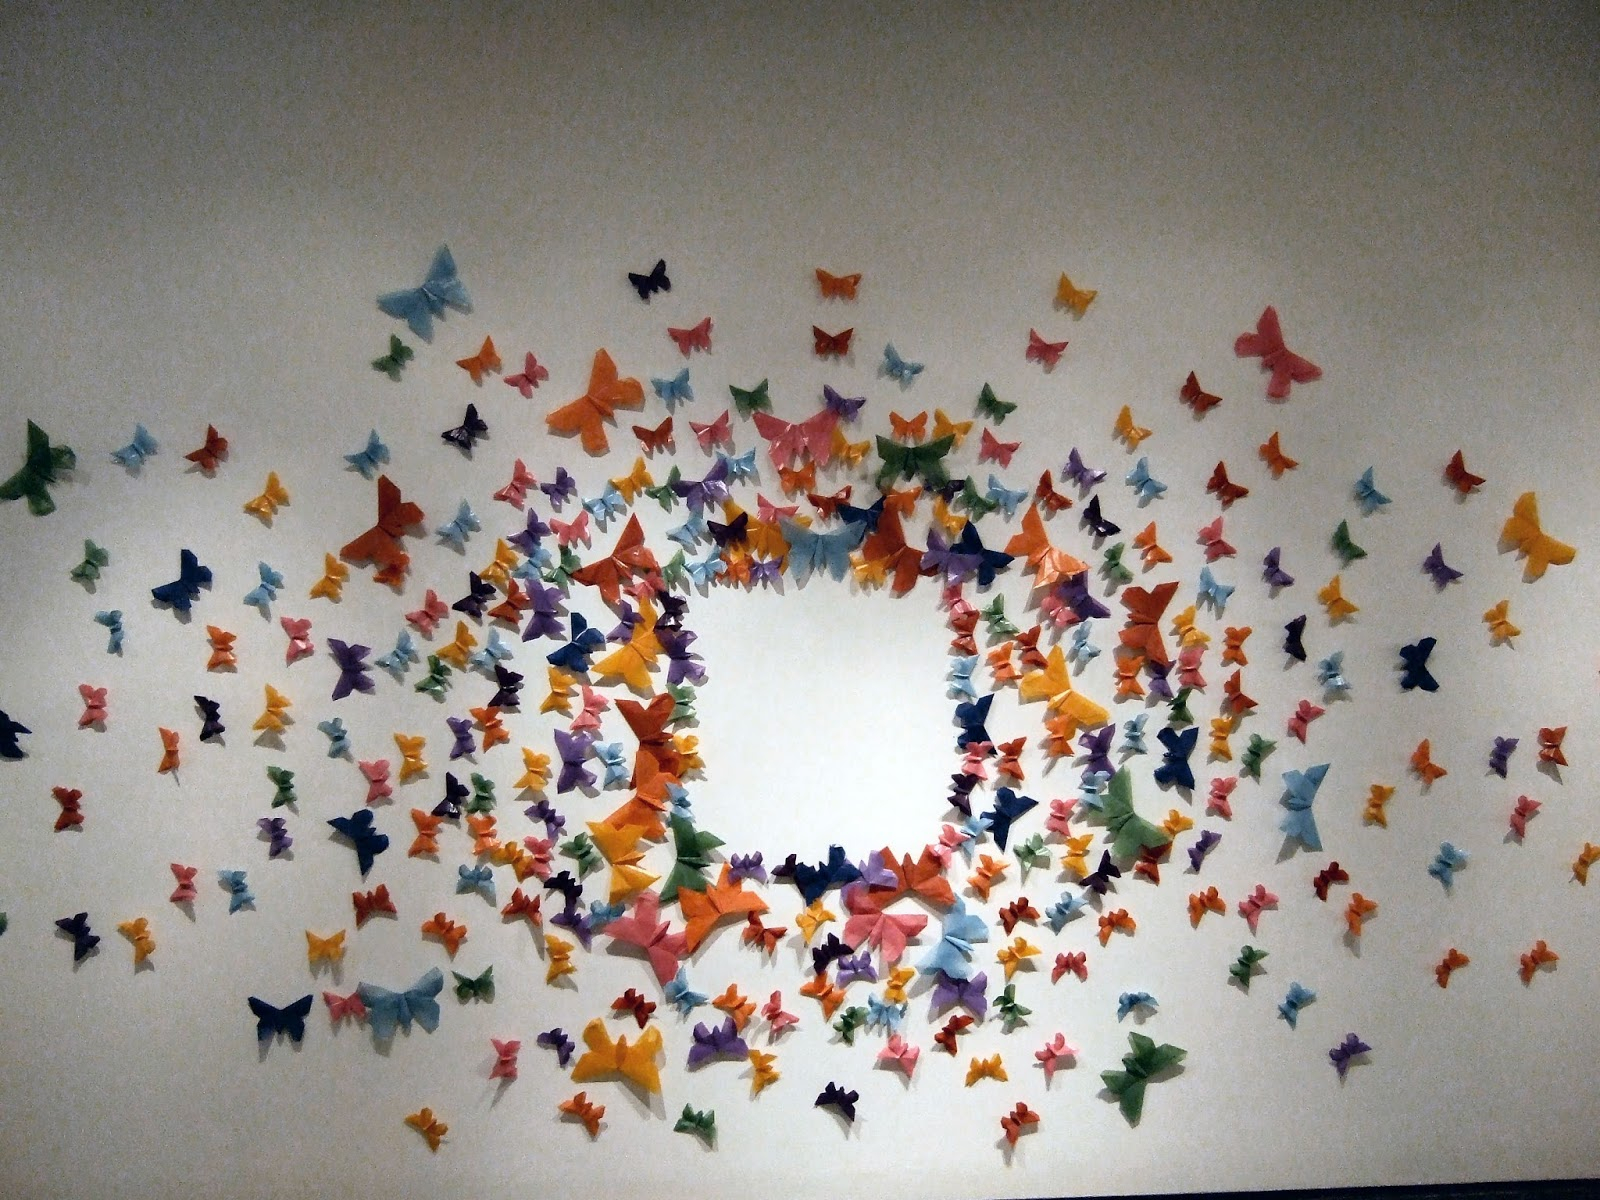 Origami Butterfly Wall Florida Flowers And Gardens Origami Exhibition At Artis Naples And